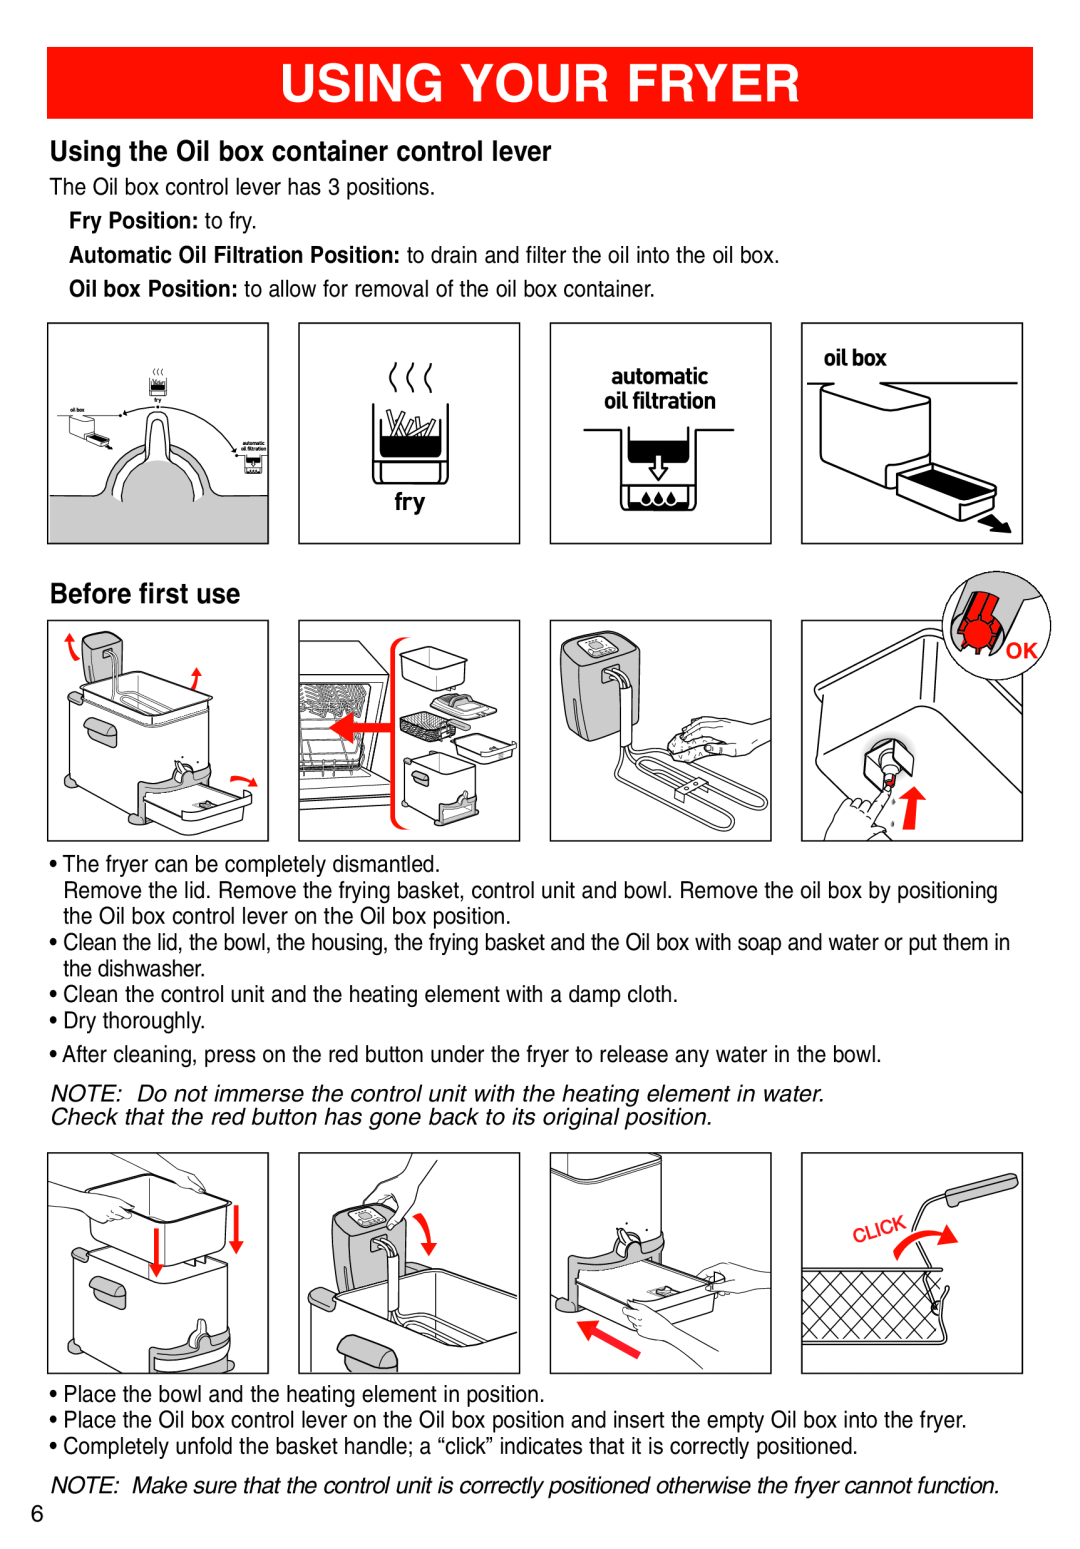 T-Fal Deep Fryer manual Using Your Fryer, Using the Oil box container control lever, Before first use, Fry Position to fry 